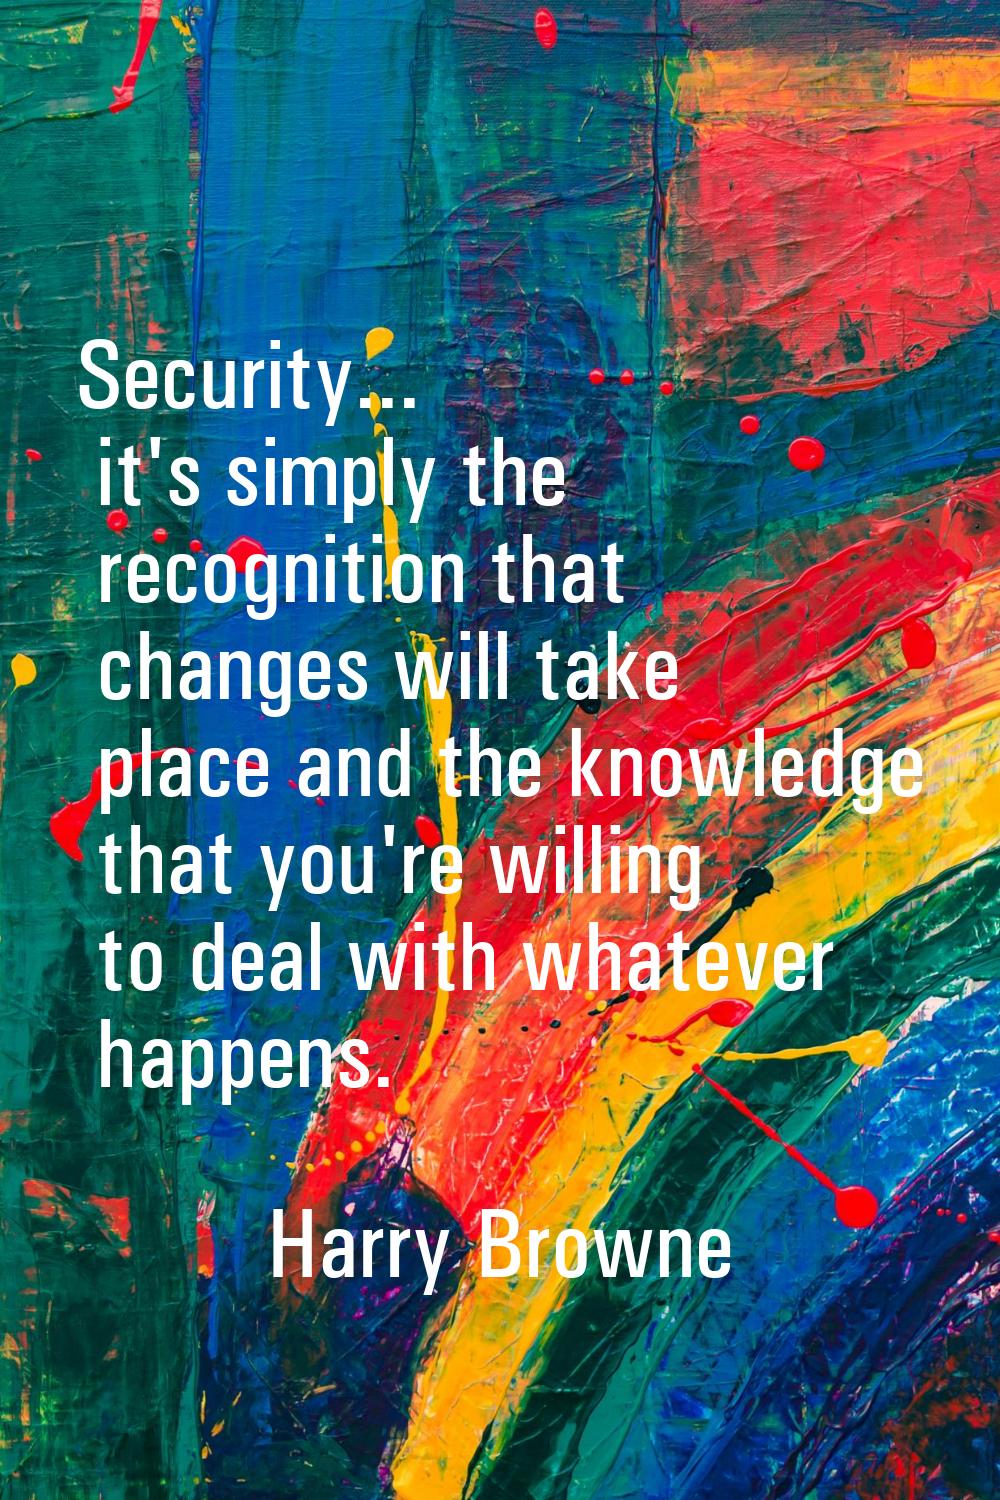 Security... it's simply the recognition that changes will take place and the knowledge that you're 